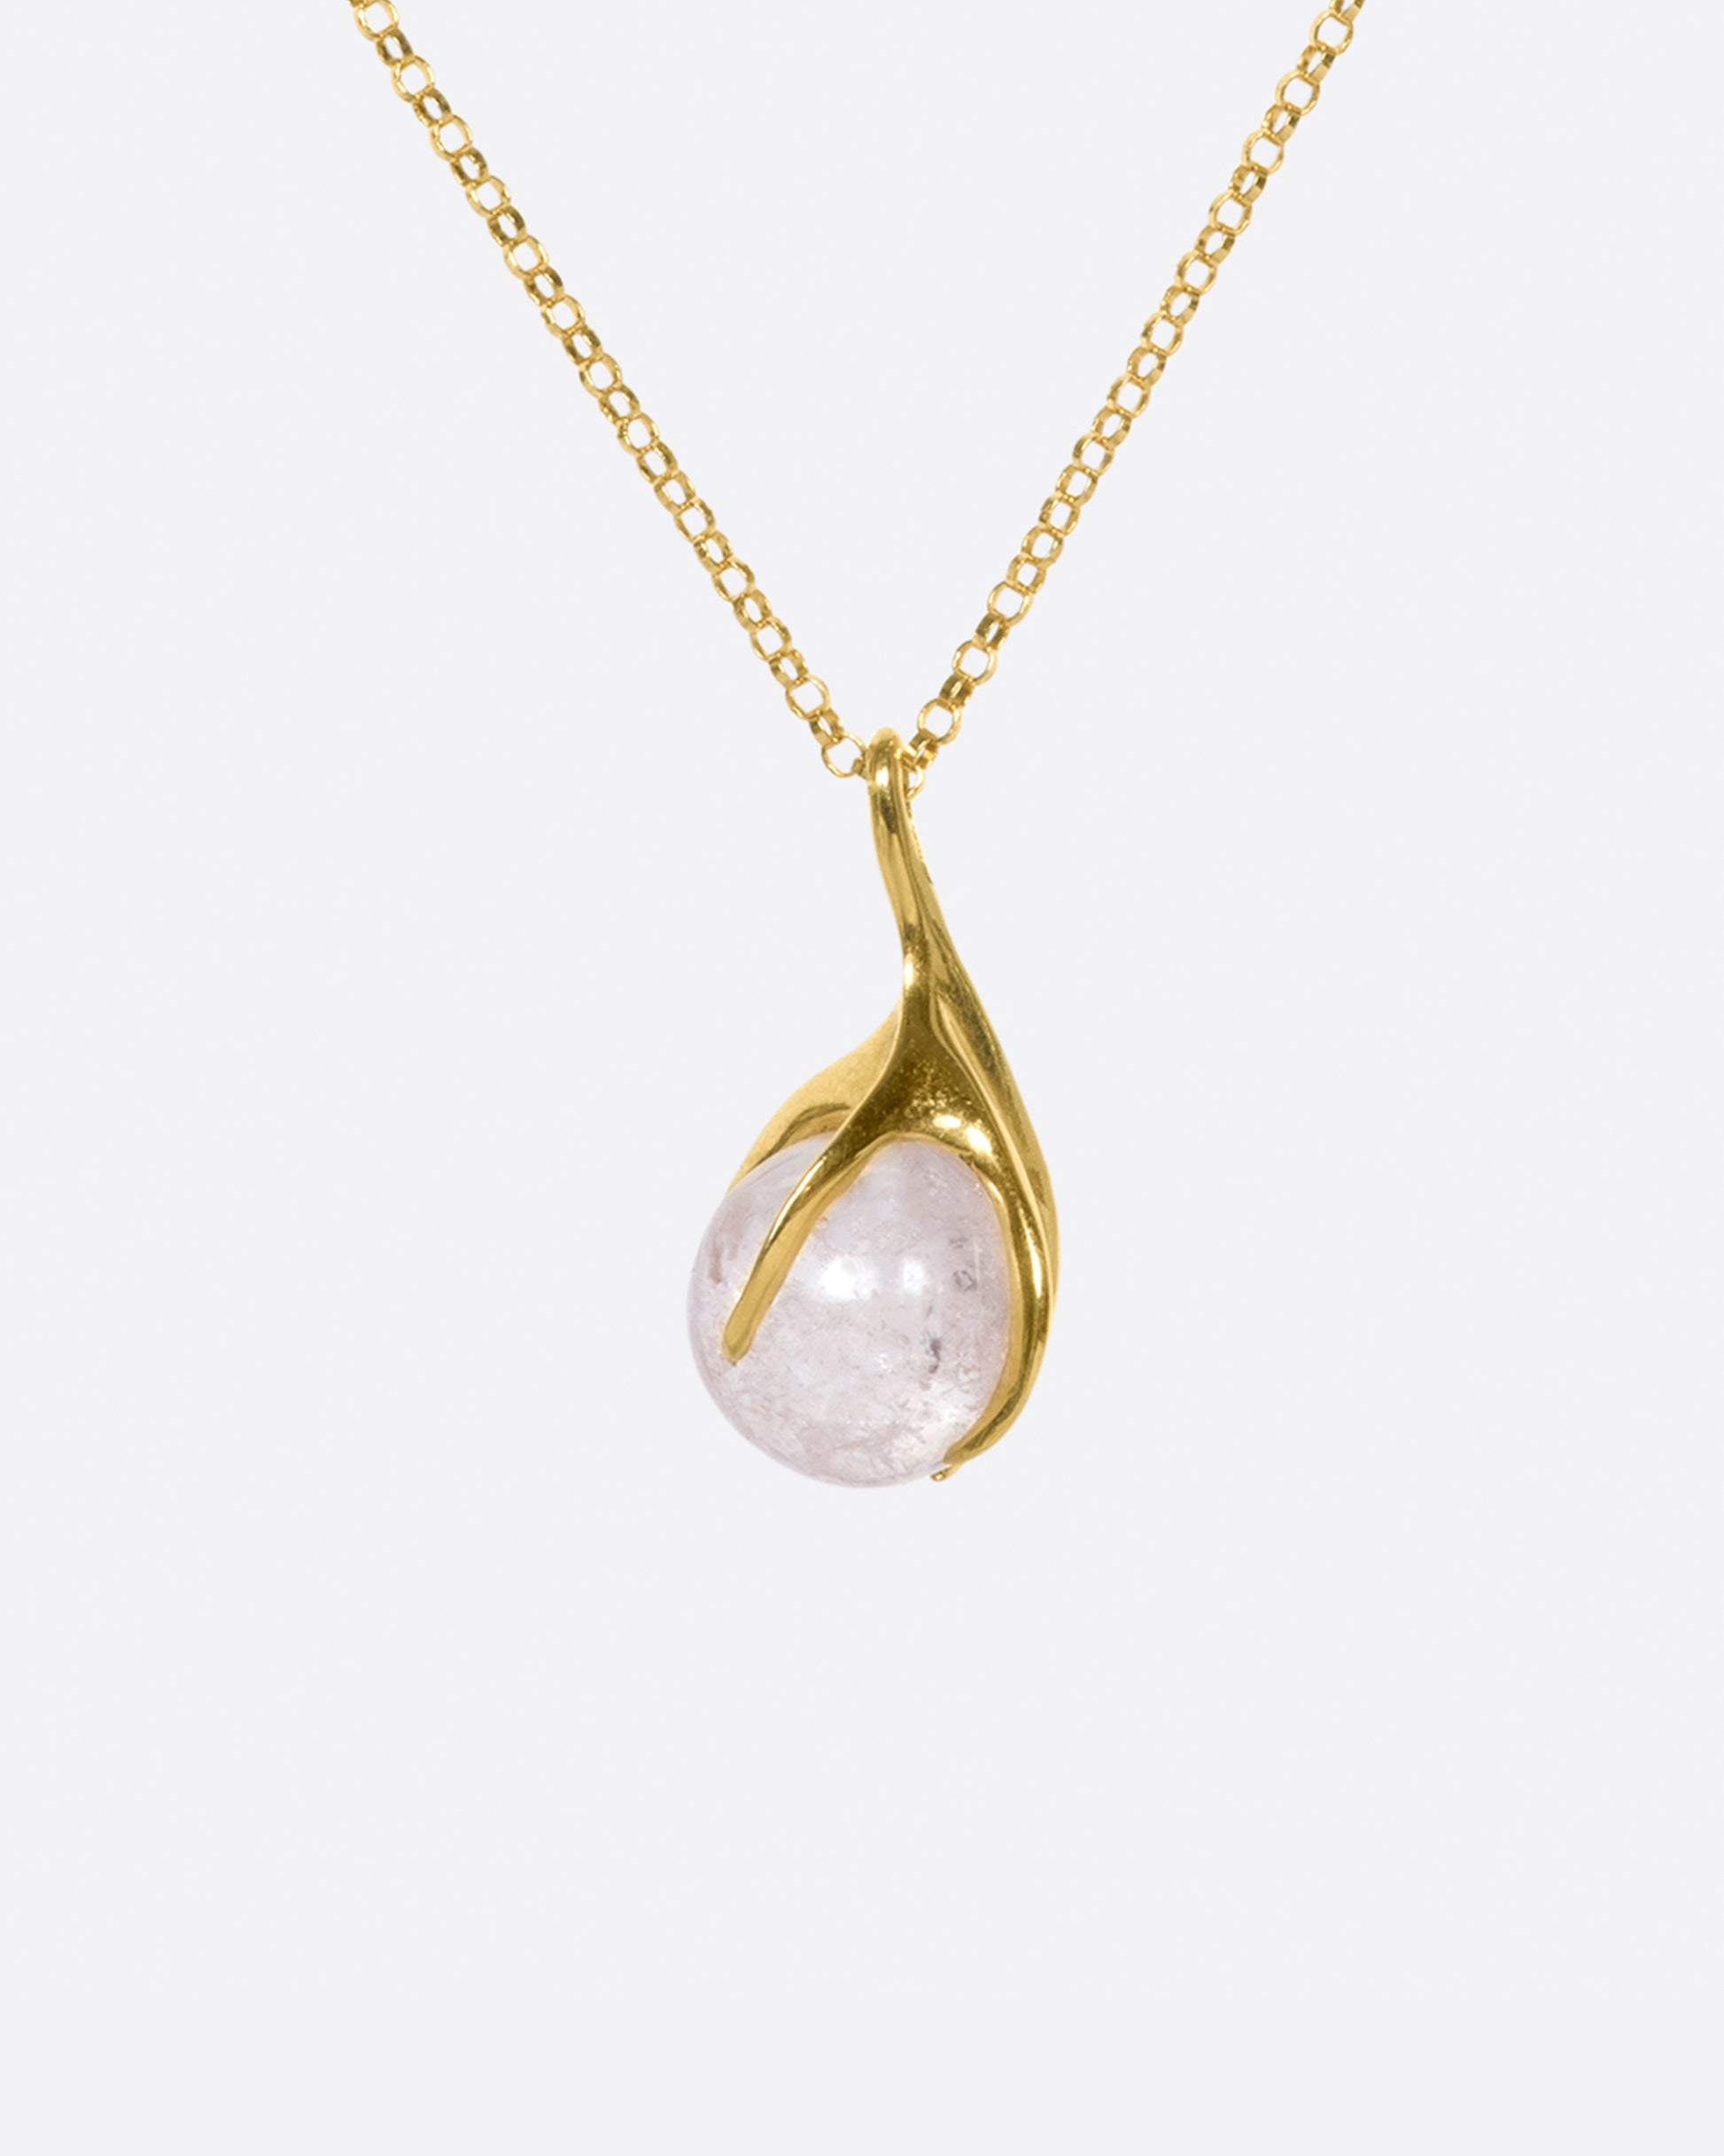 A pale pink tourmaline sphere is set in a gold claw setting for a substantial, yet airy pendant.